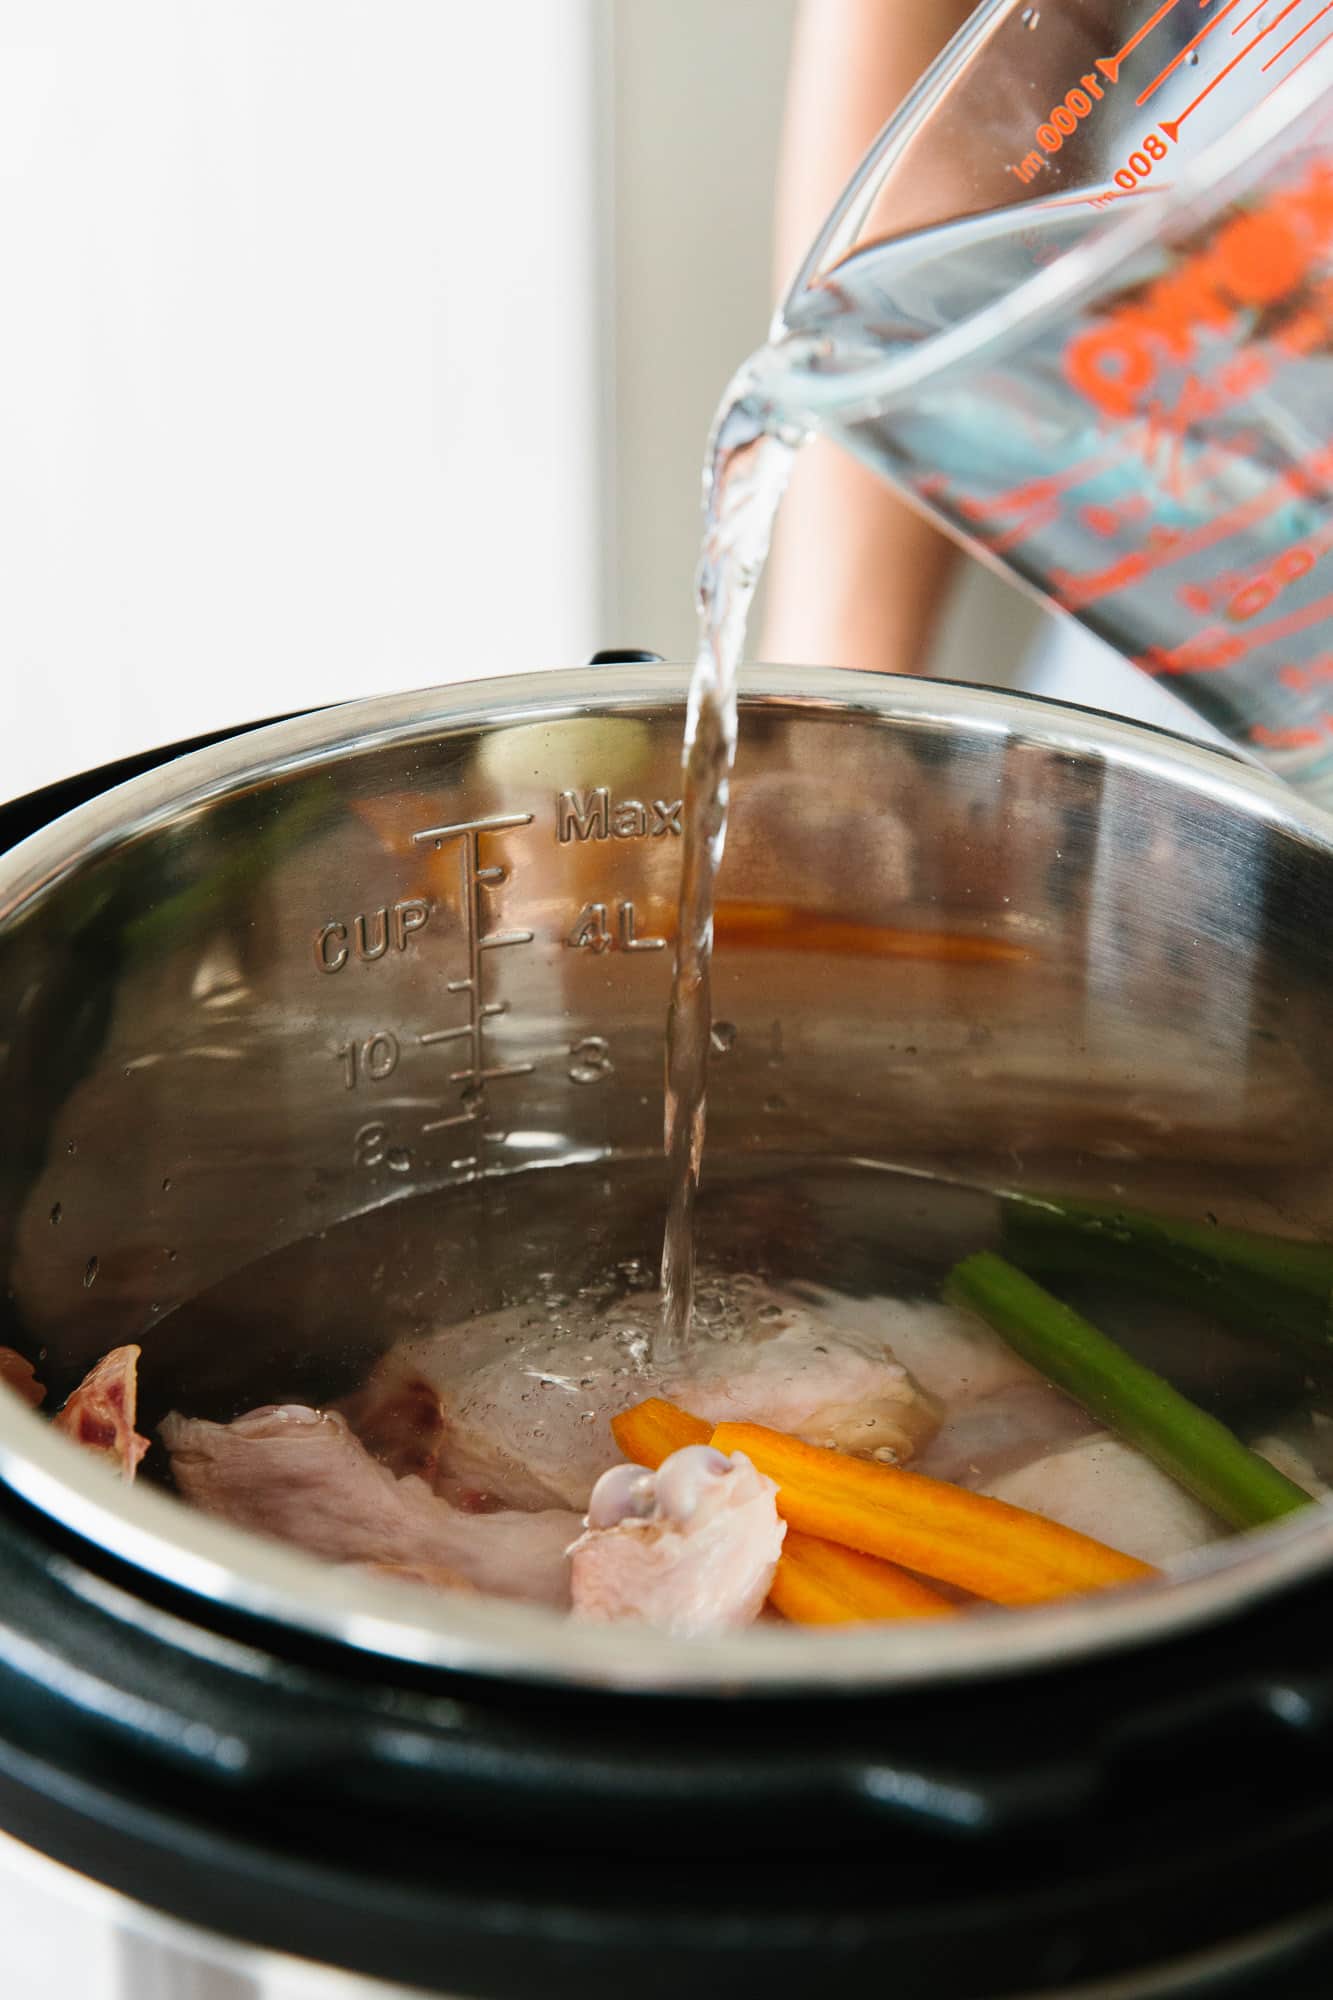 How To Make Chicken Stock in an Electric Pressure Cooker | Kitchn